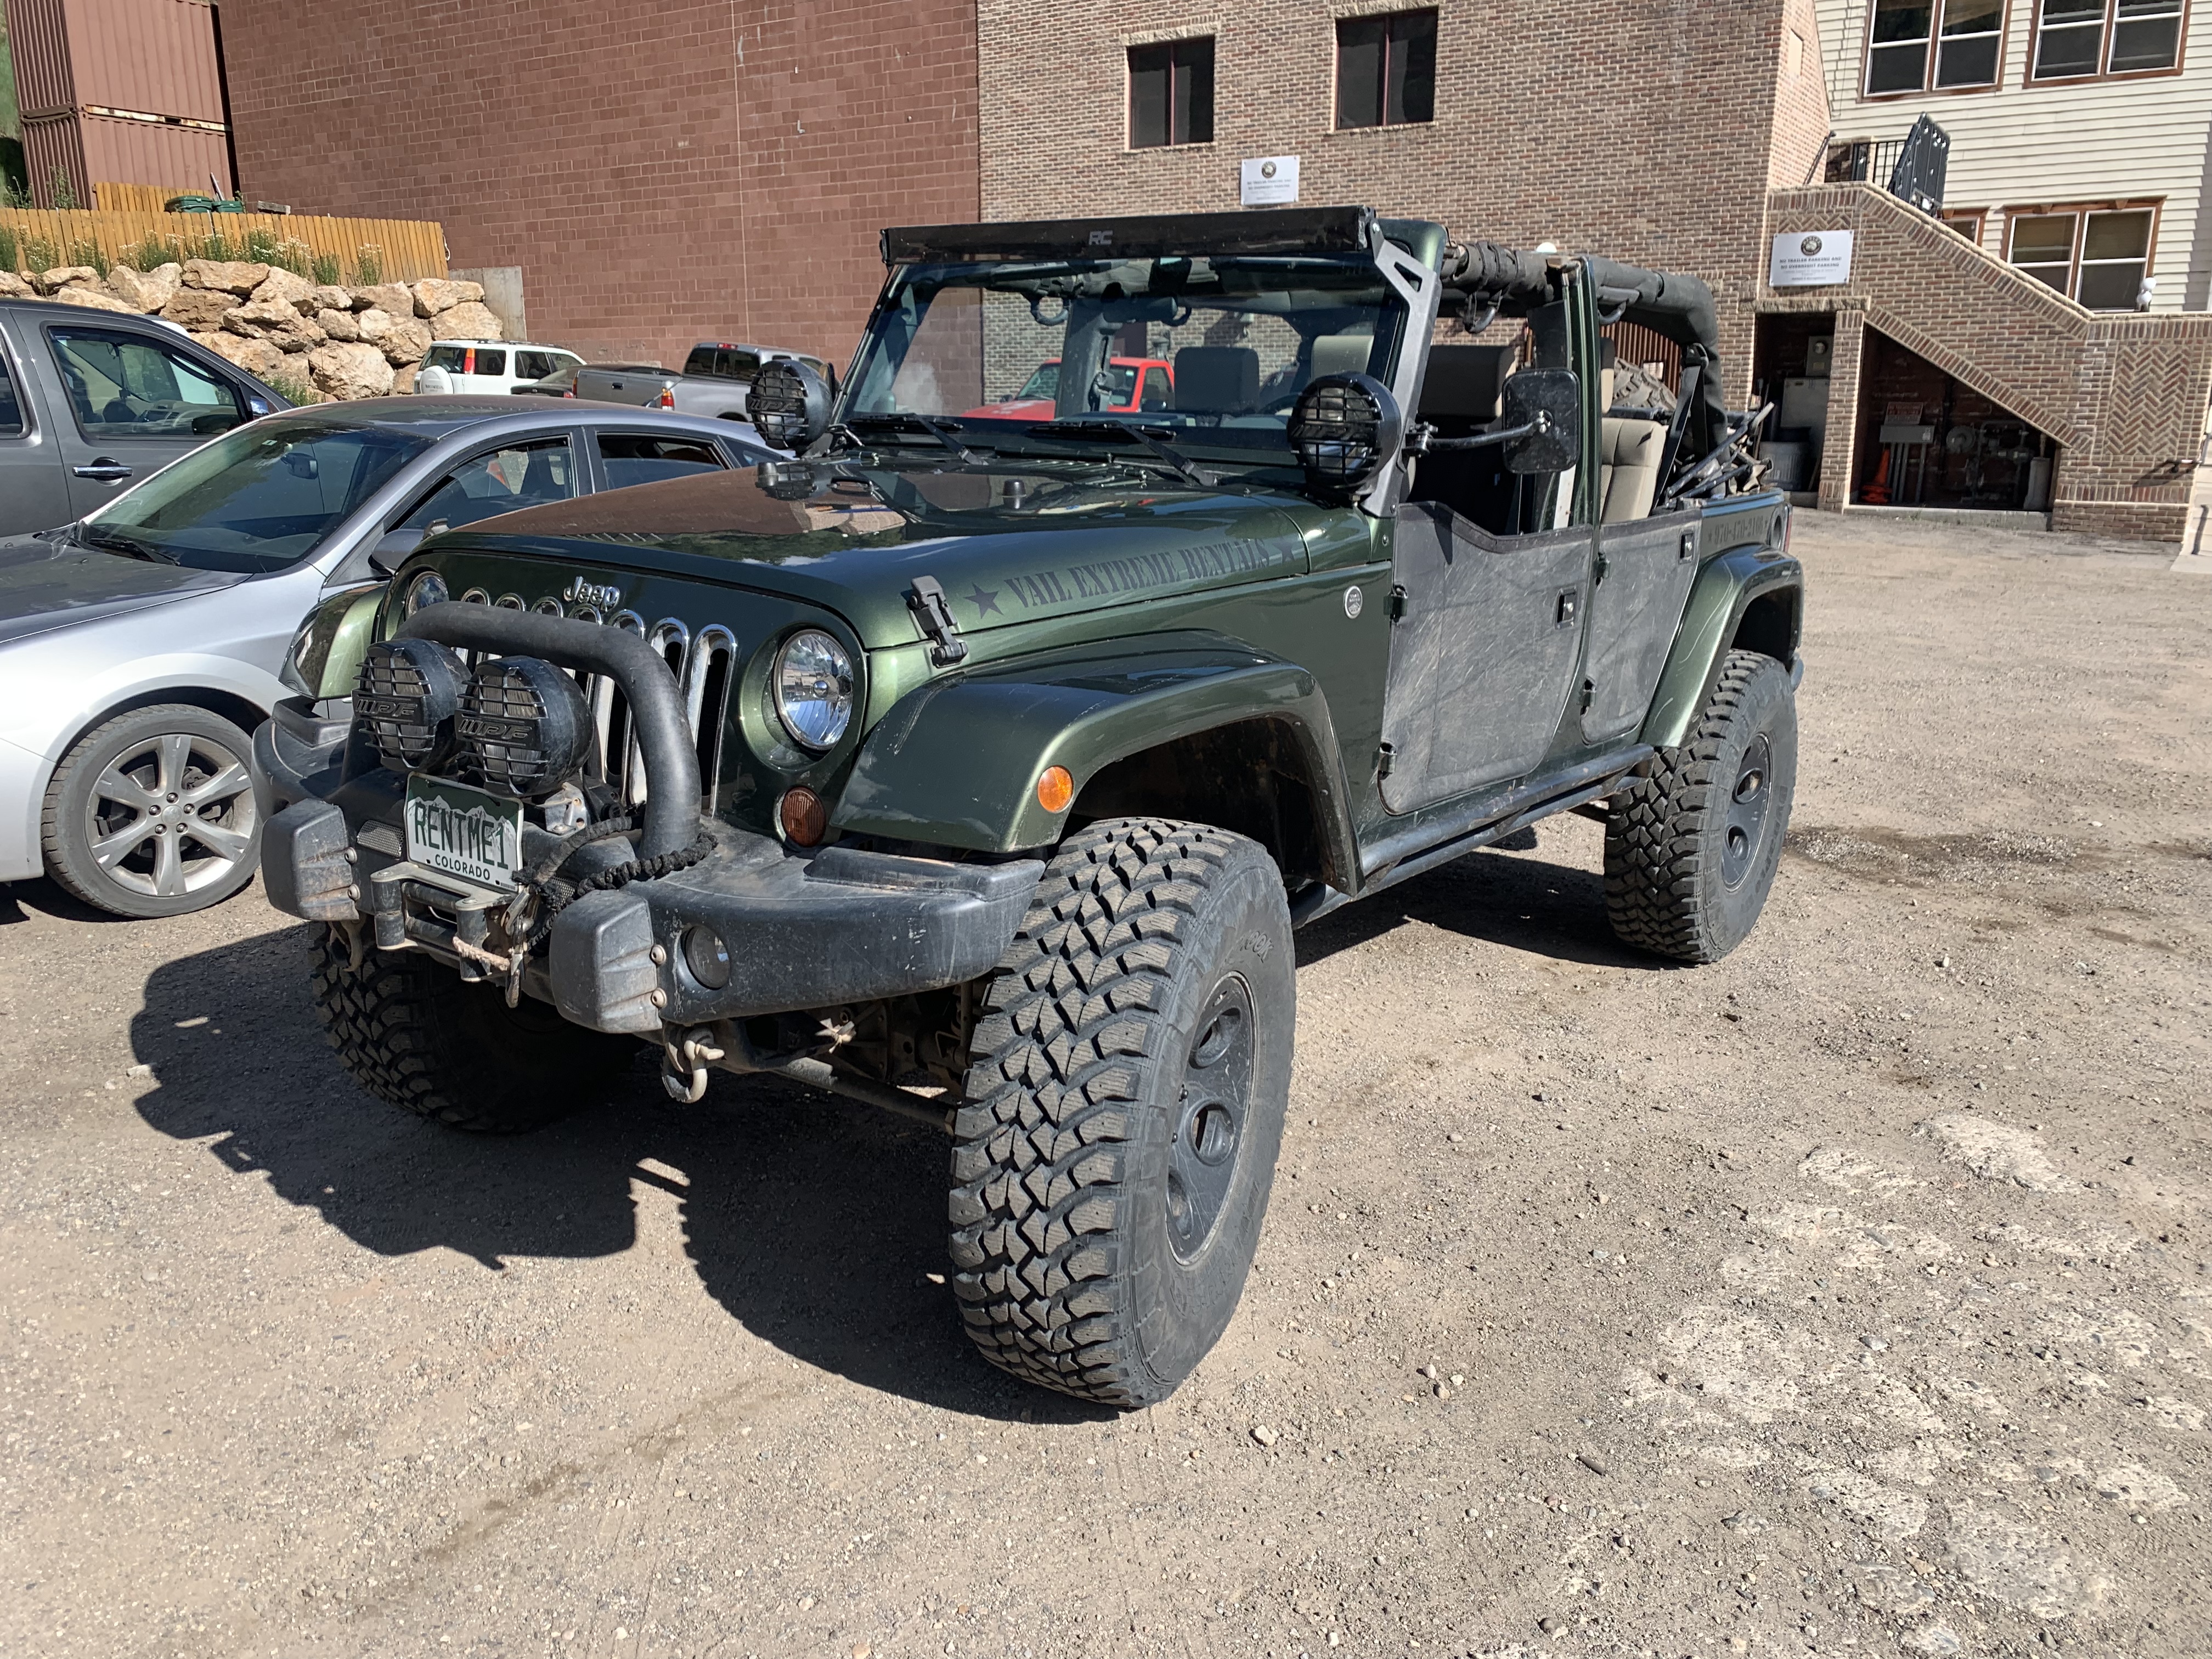 Off Road Jeep Rentals & Unguided Tours near Denver & Vail CO | Vail Extreme Rentals